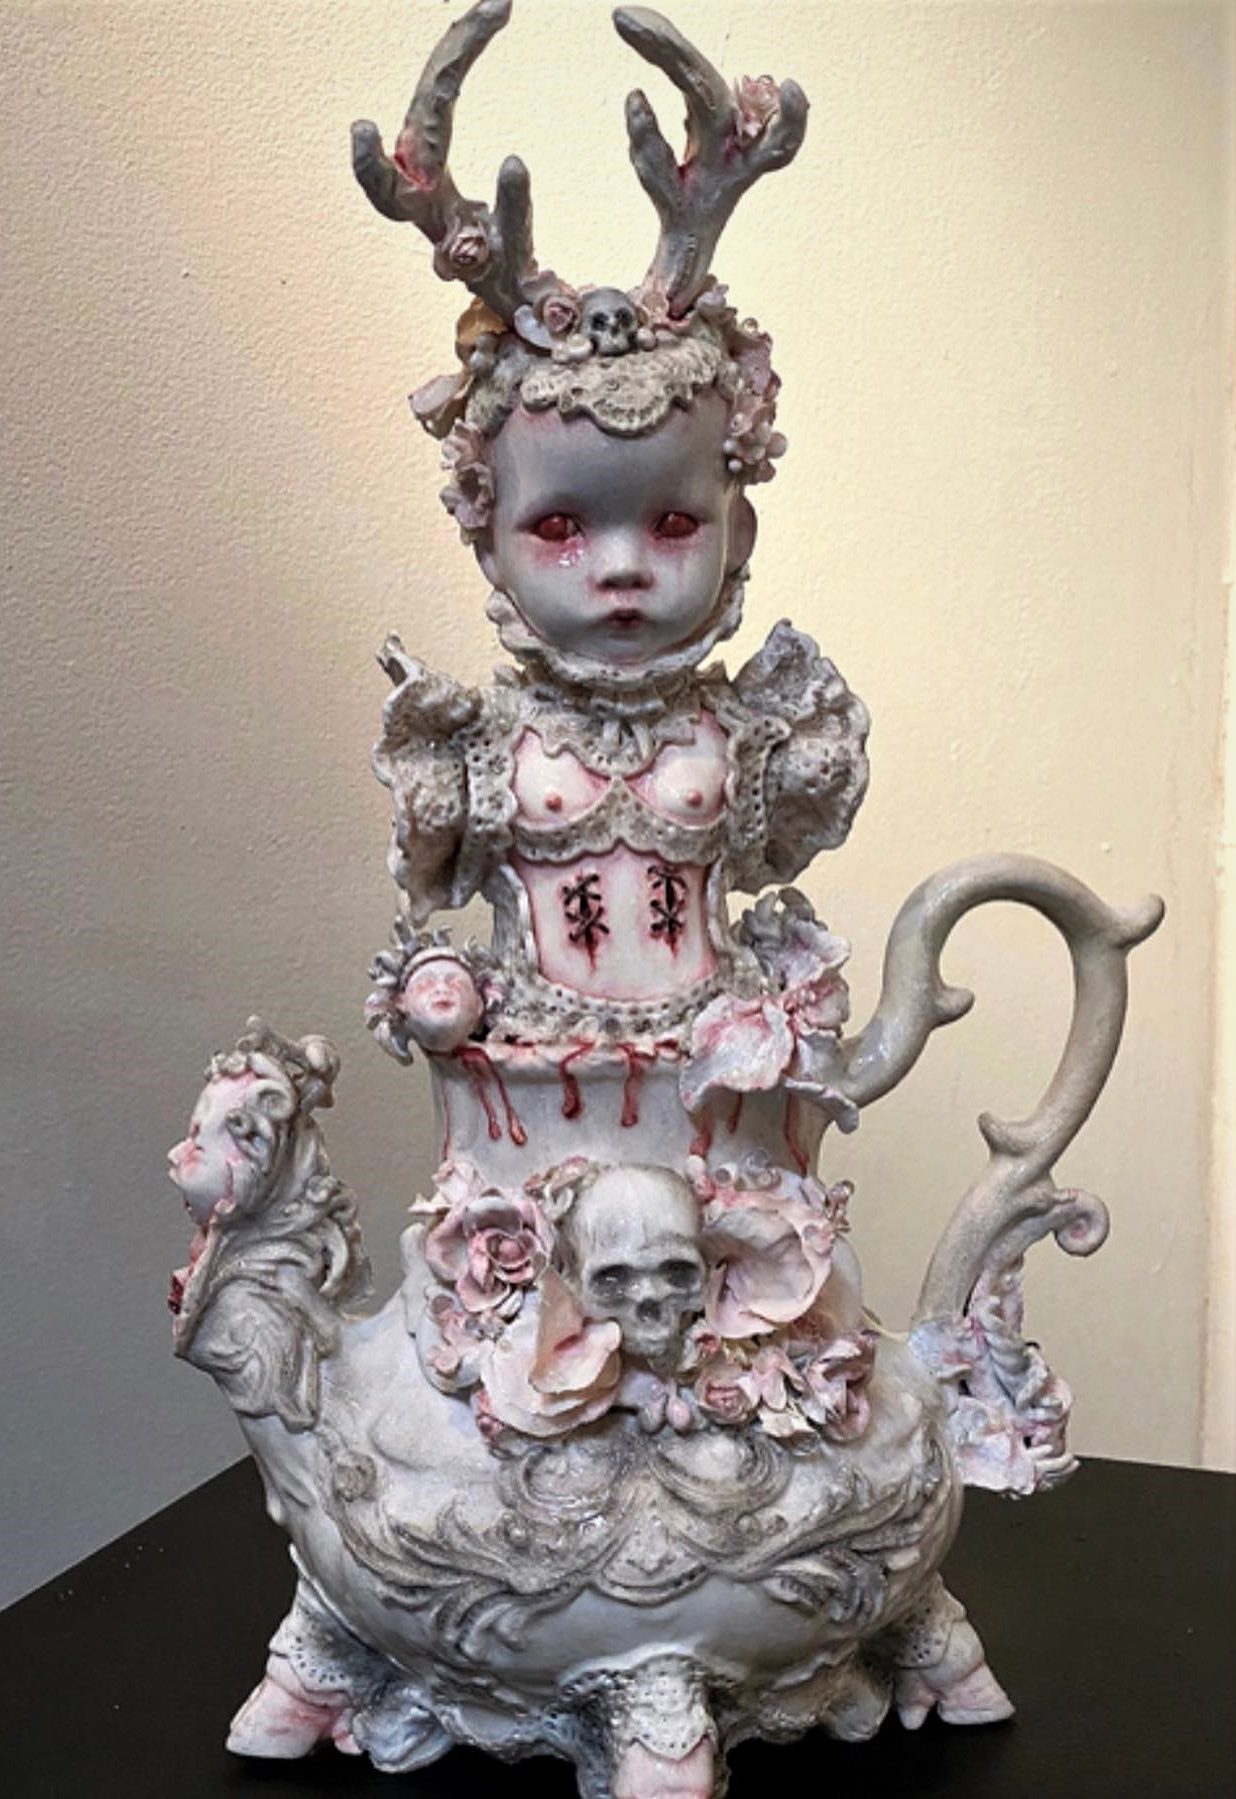 white mixed media assemblage teapot with a babydoll head wearing an antlered headdress